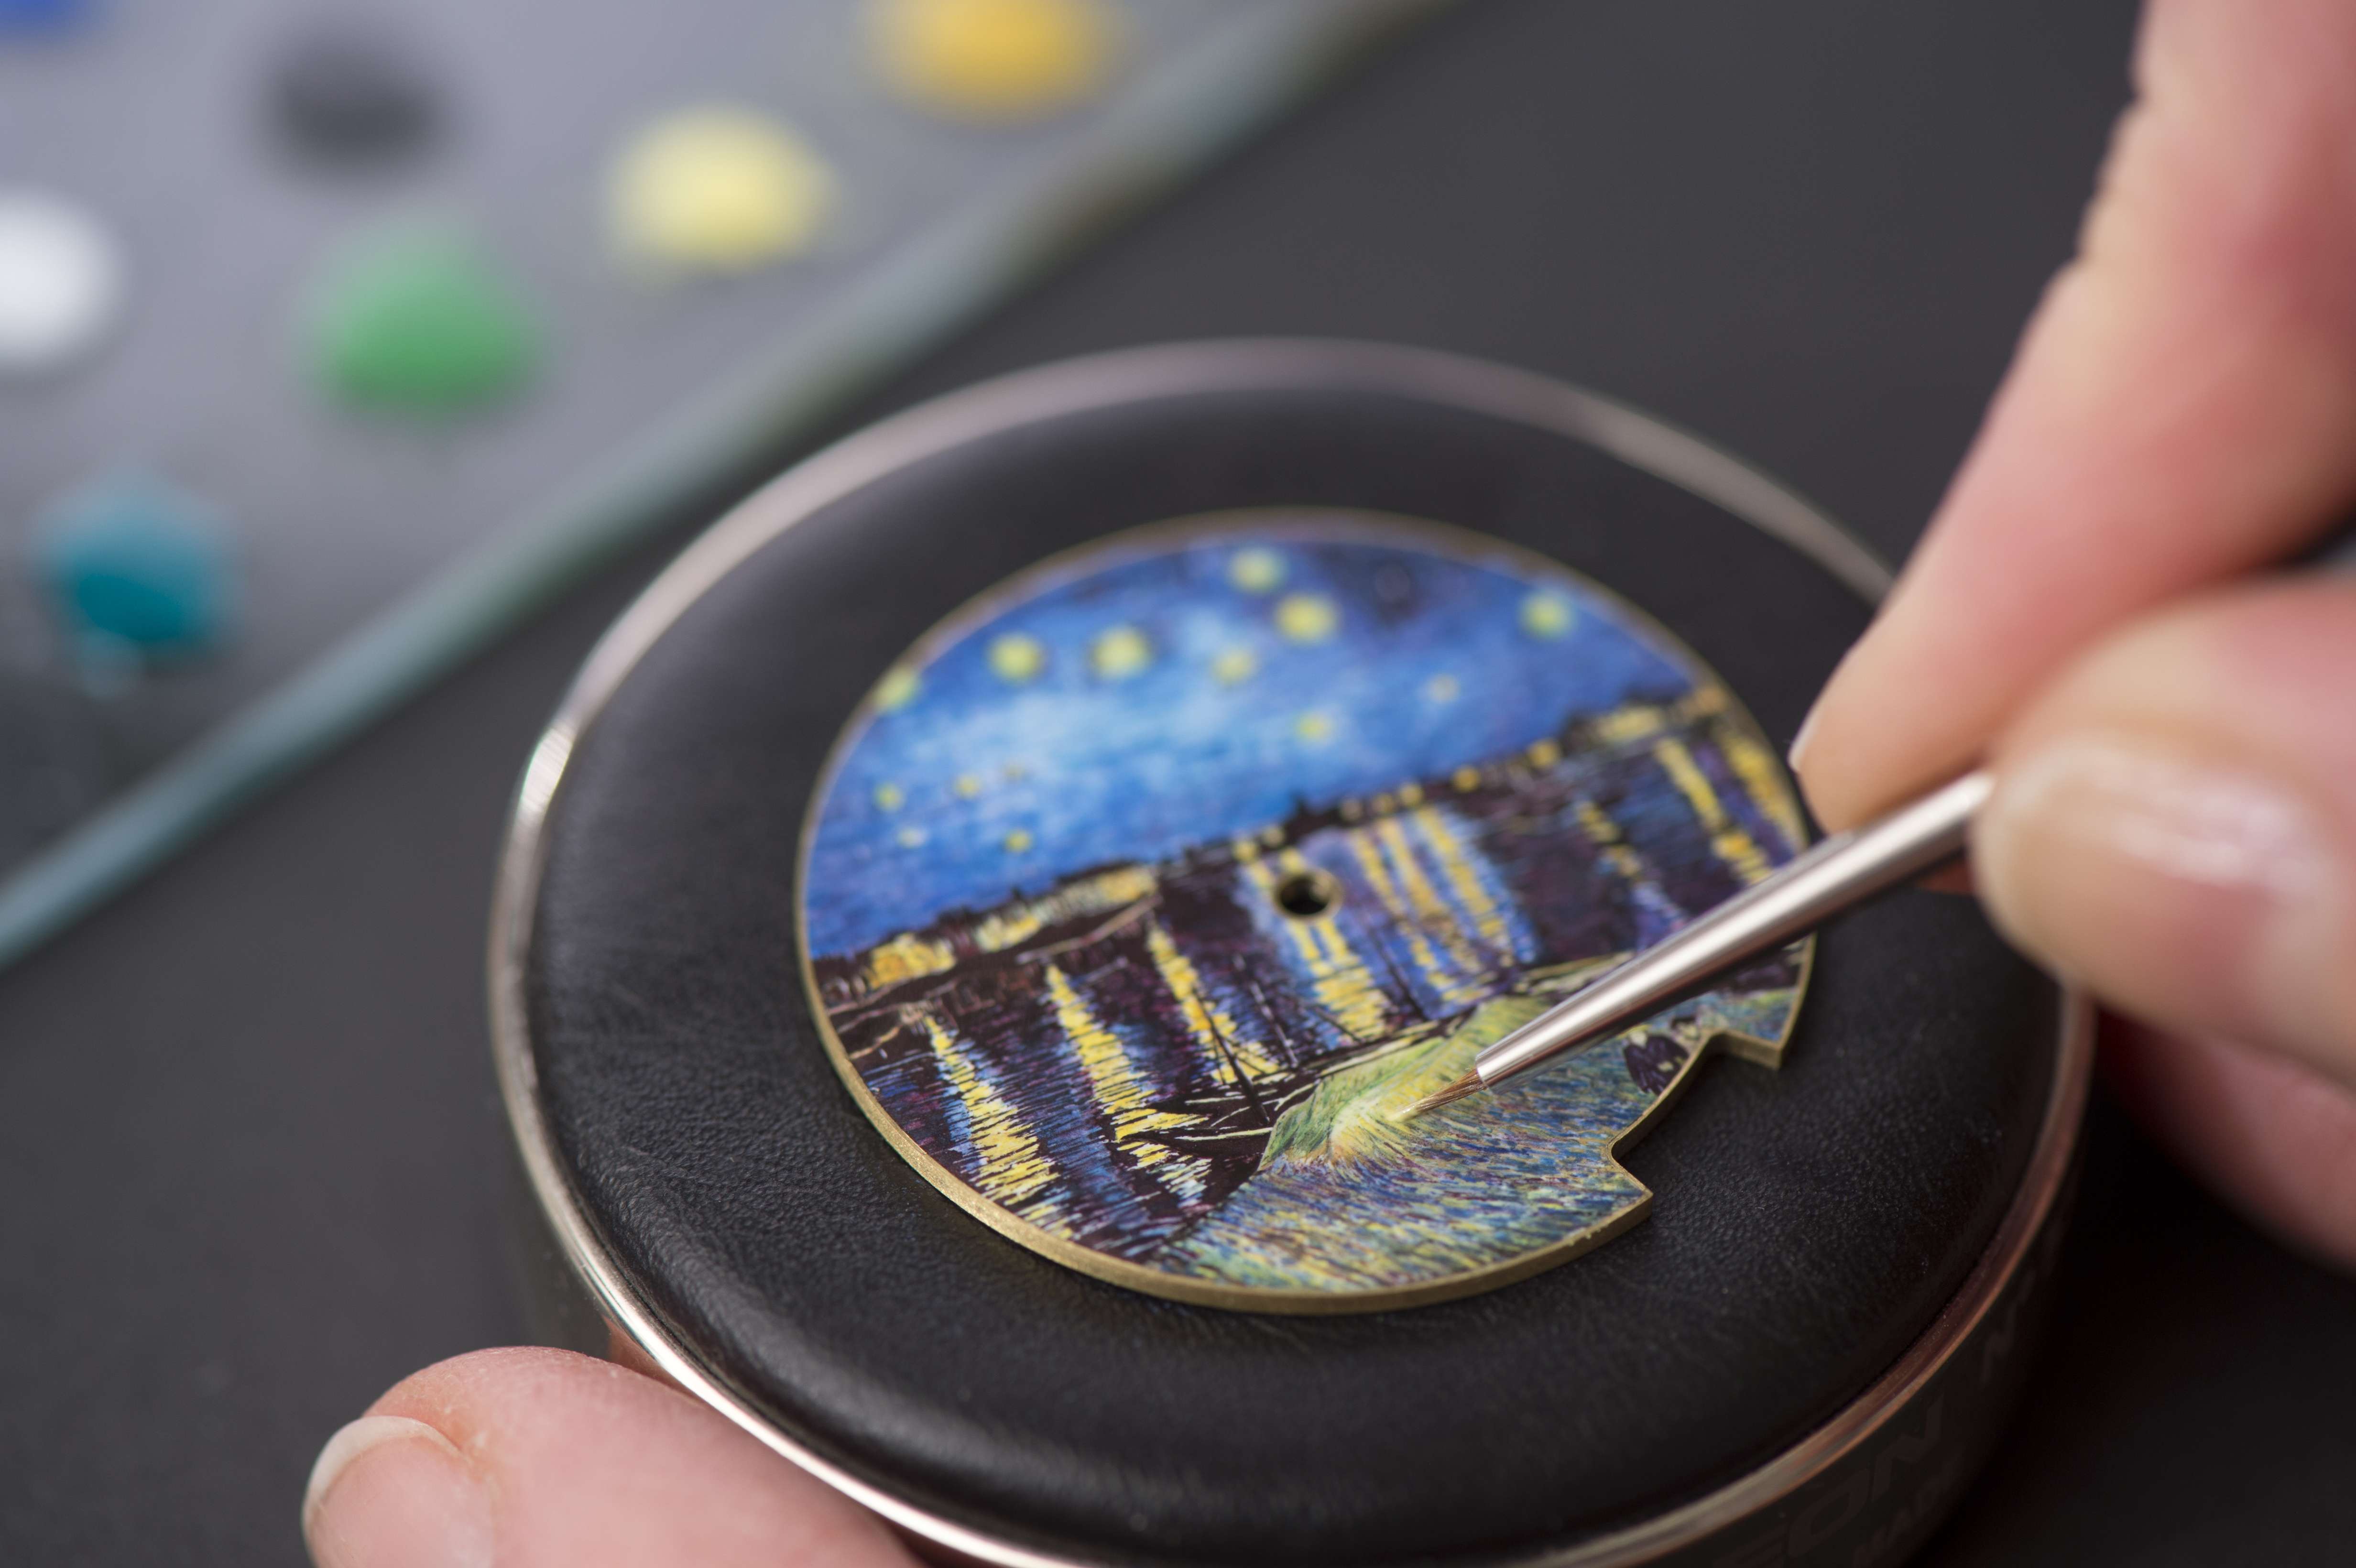 Jaeger-LeCoultre’s artisan working on a timepiece.